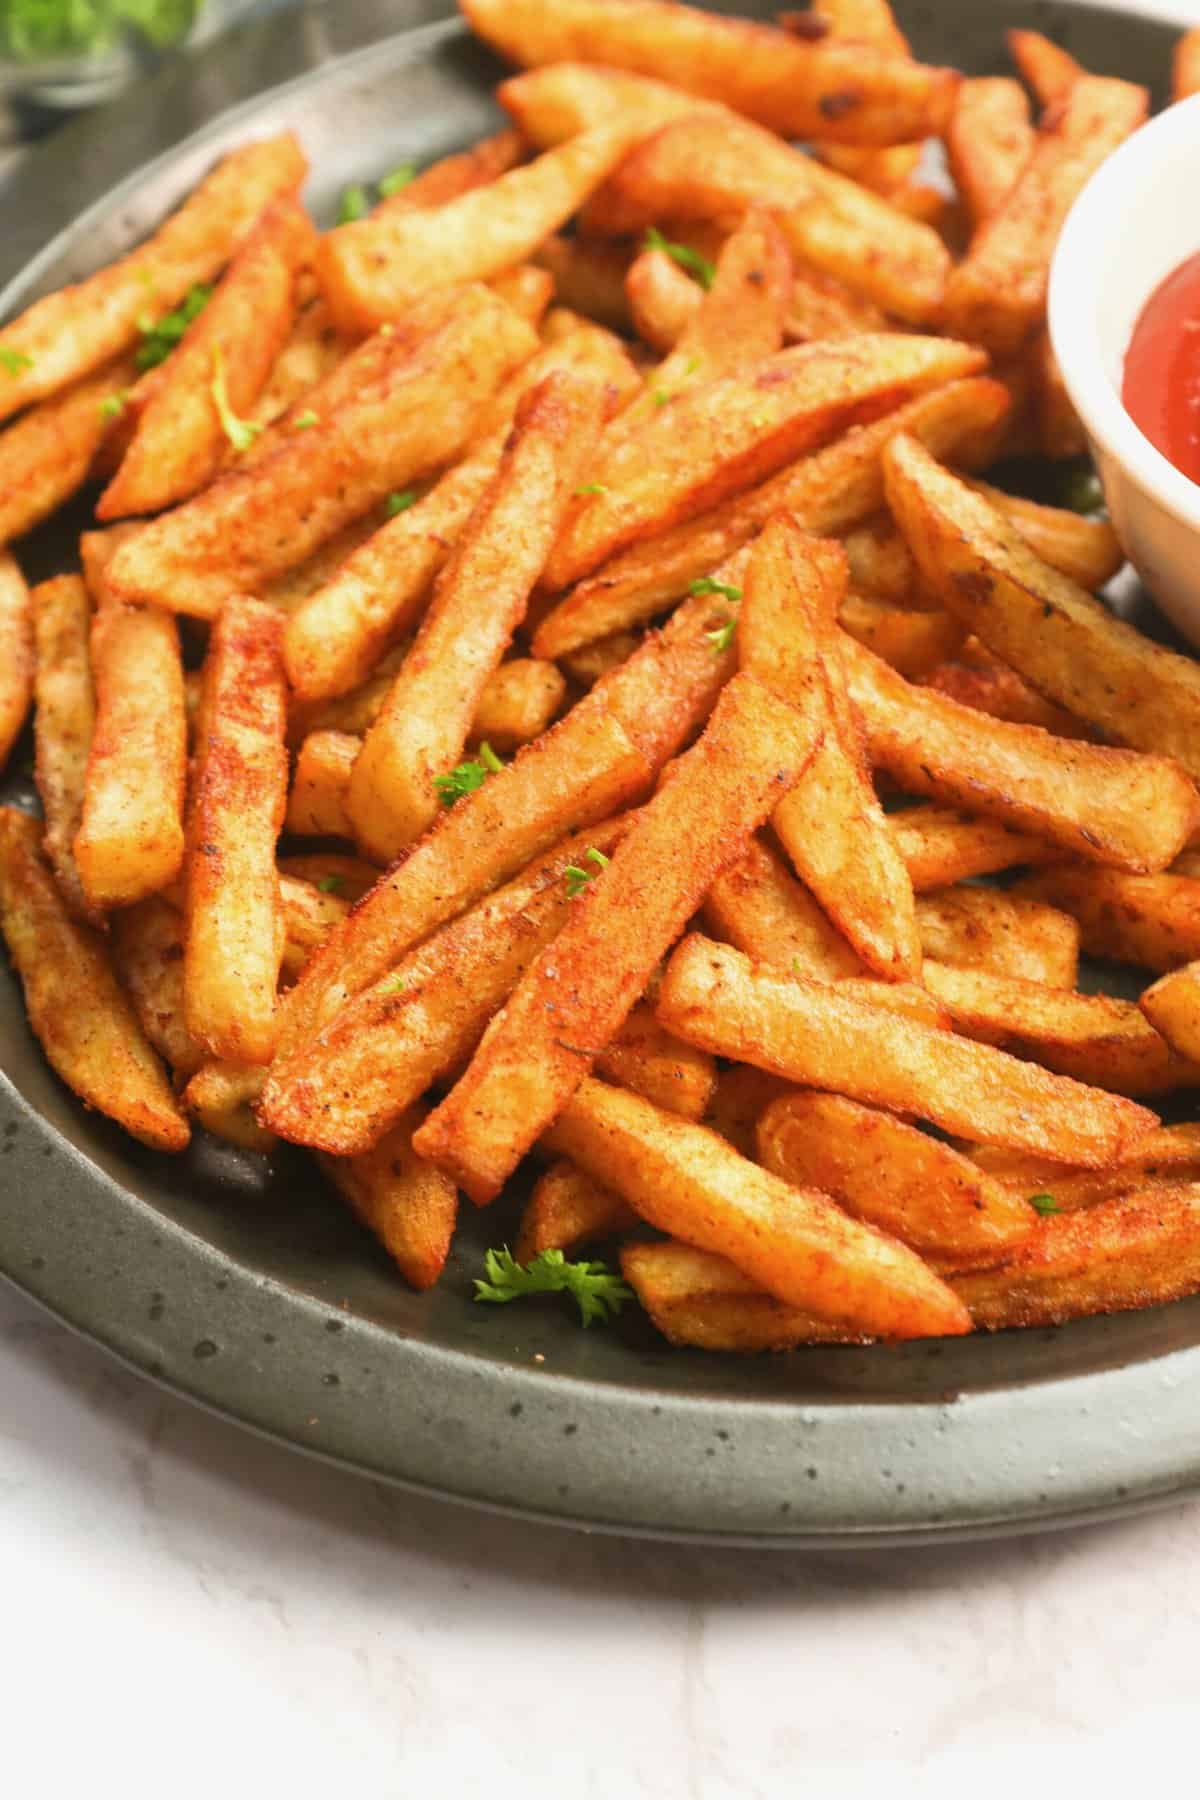 Serving up Cajun fries on a plate for pure comfort food